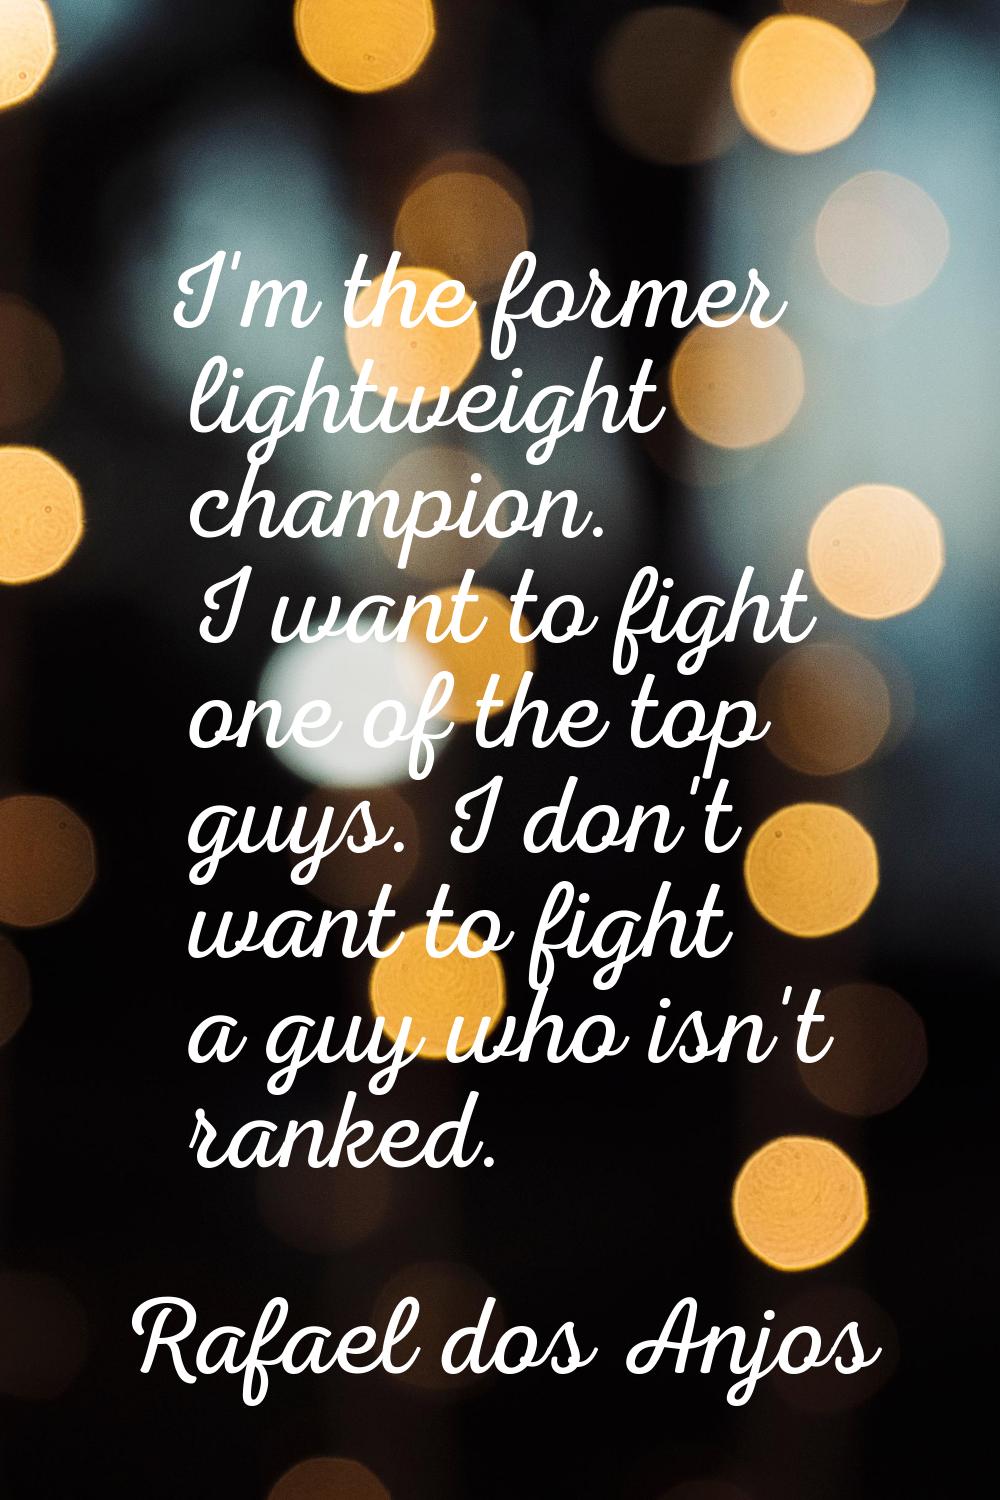 I'm the former lightweight champion. I want to fight one of the top guys. I don't want to fight a g